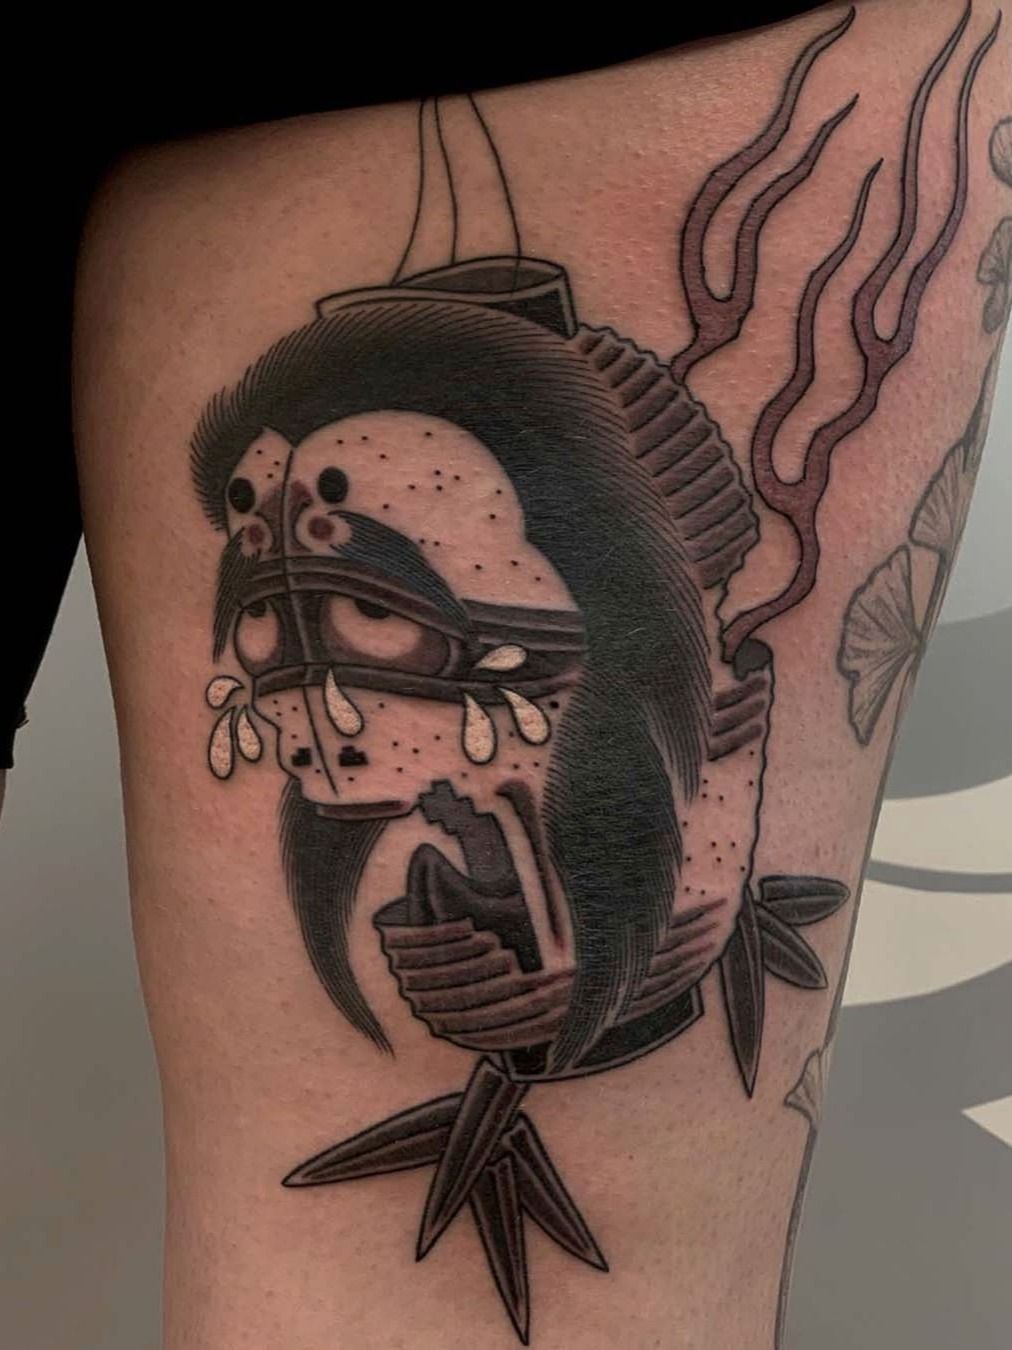 keithatlin would love to do some more Japanese inspired pieces Japanese  yokai stories are a great source of inspira  Tattoos Japanese tattoo  art Ukiyoe tattoo